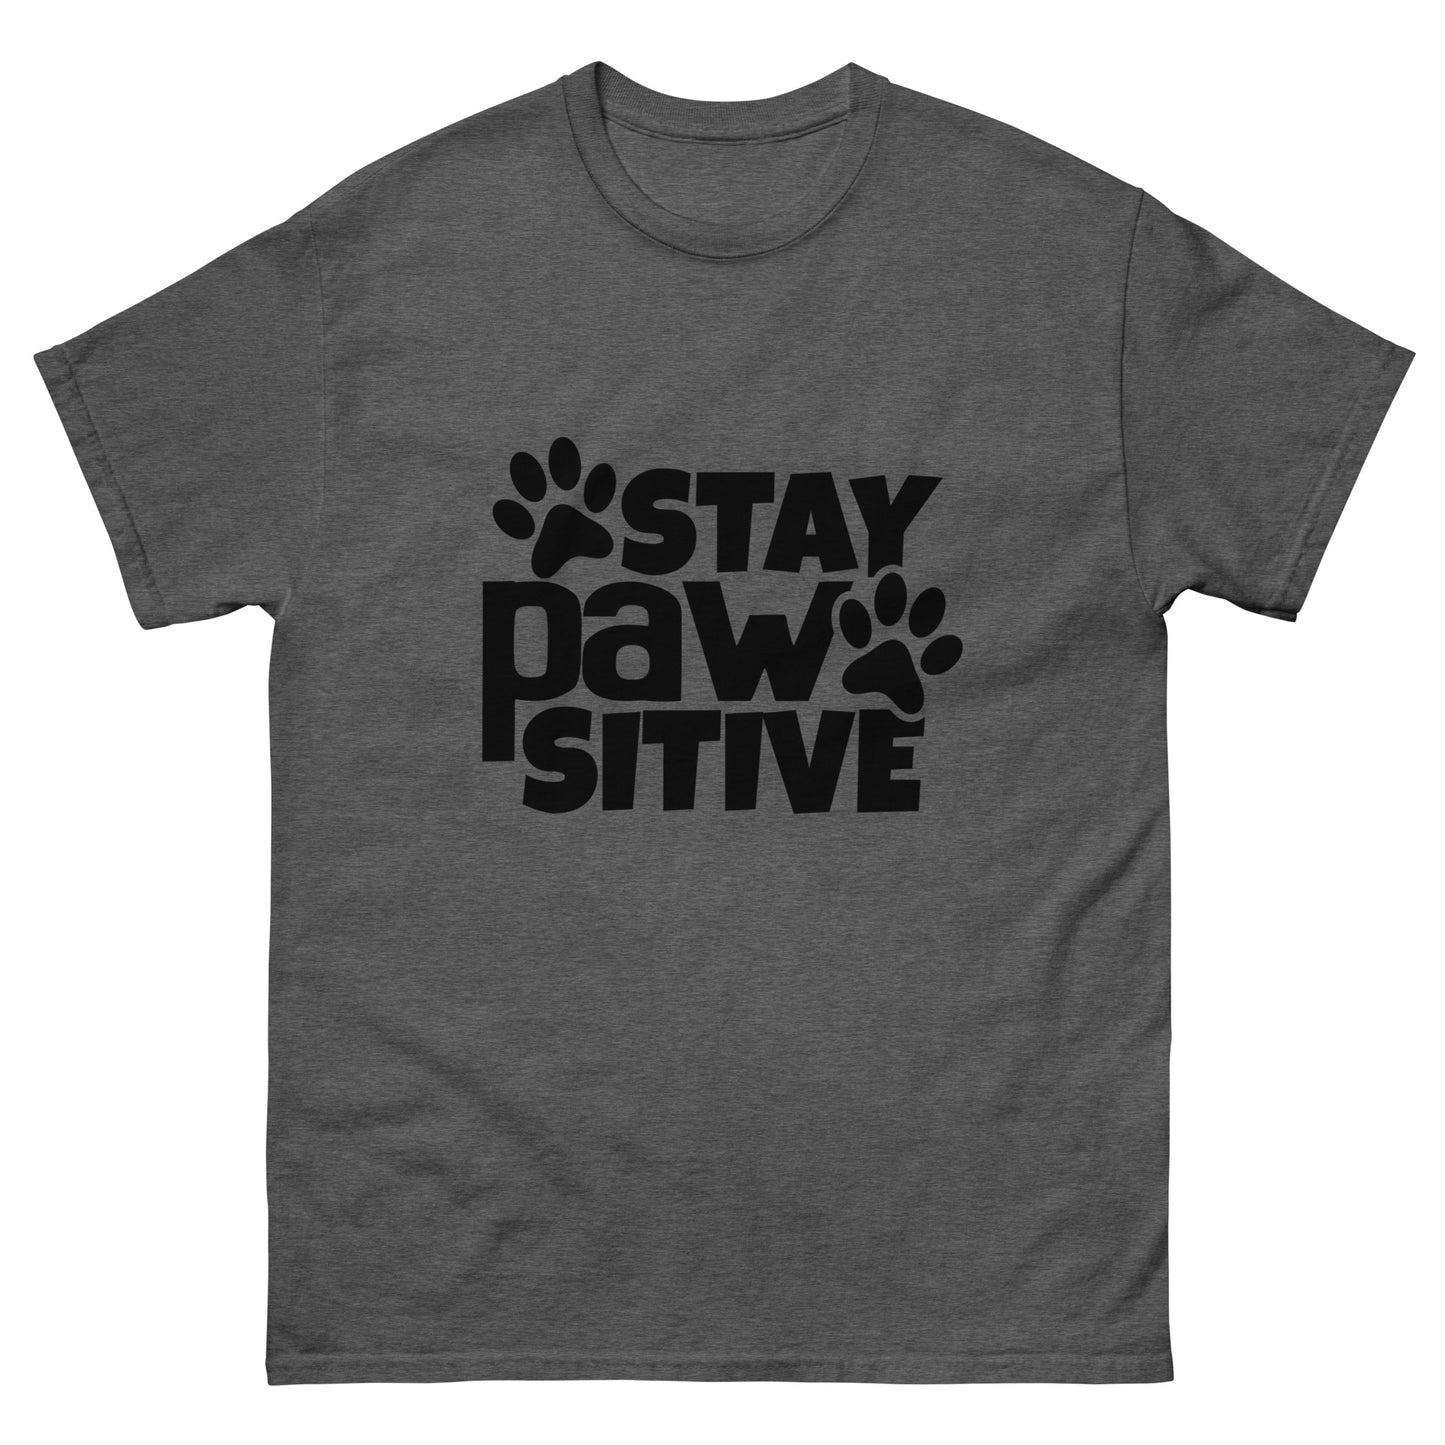 Stay Pawsitive - classic tee